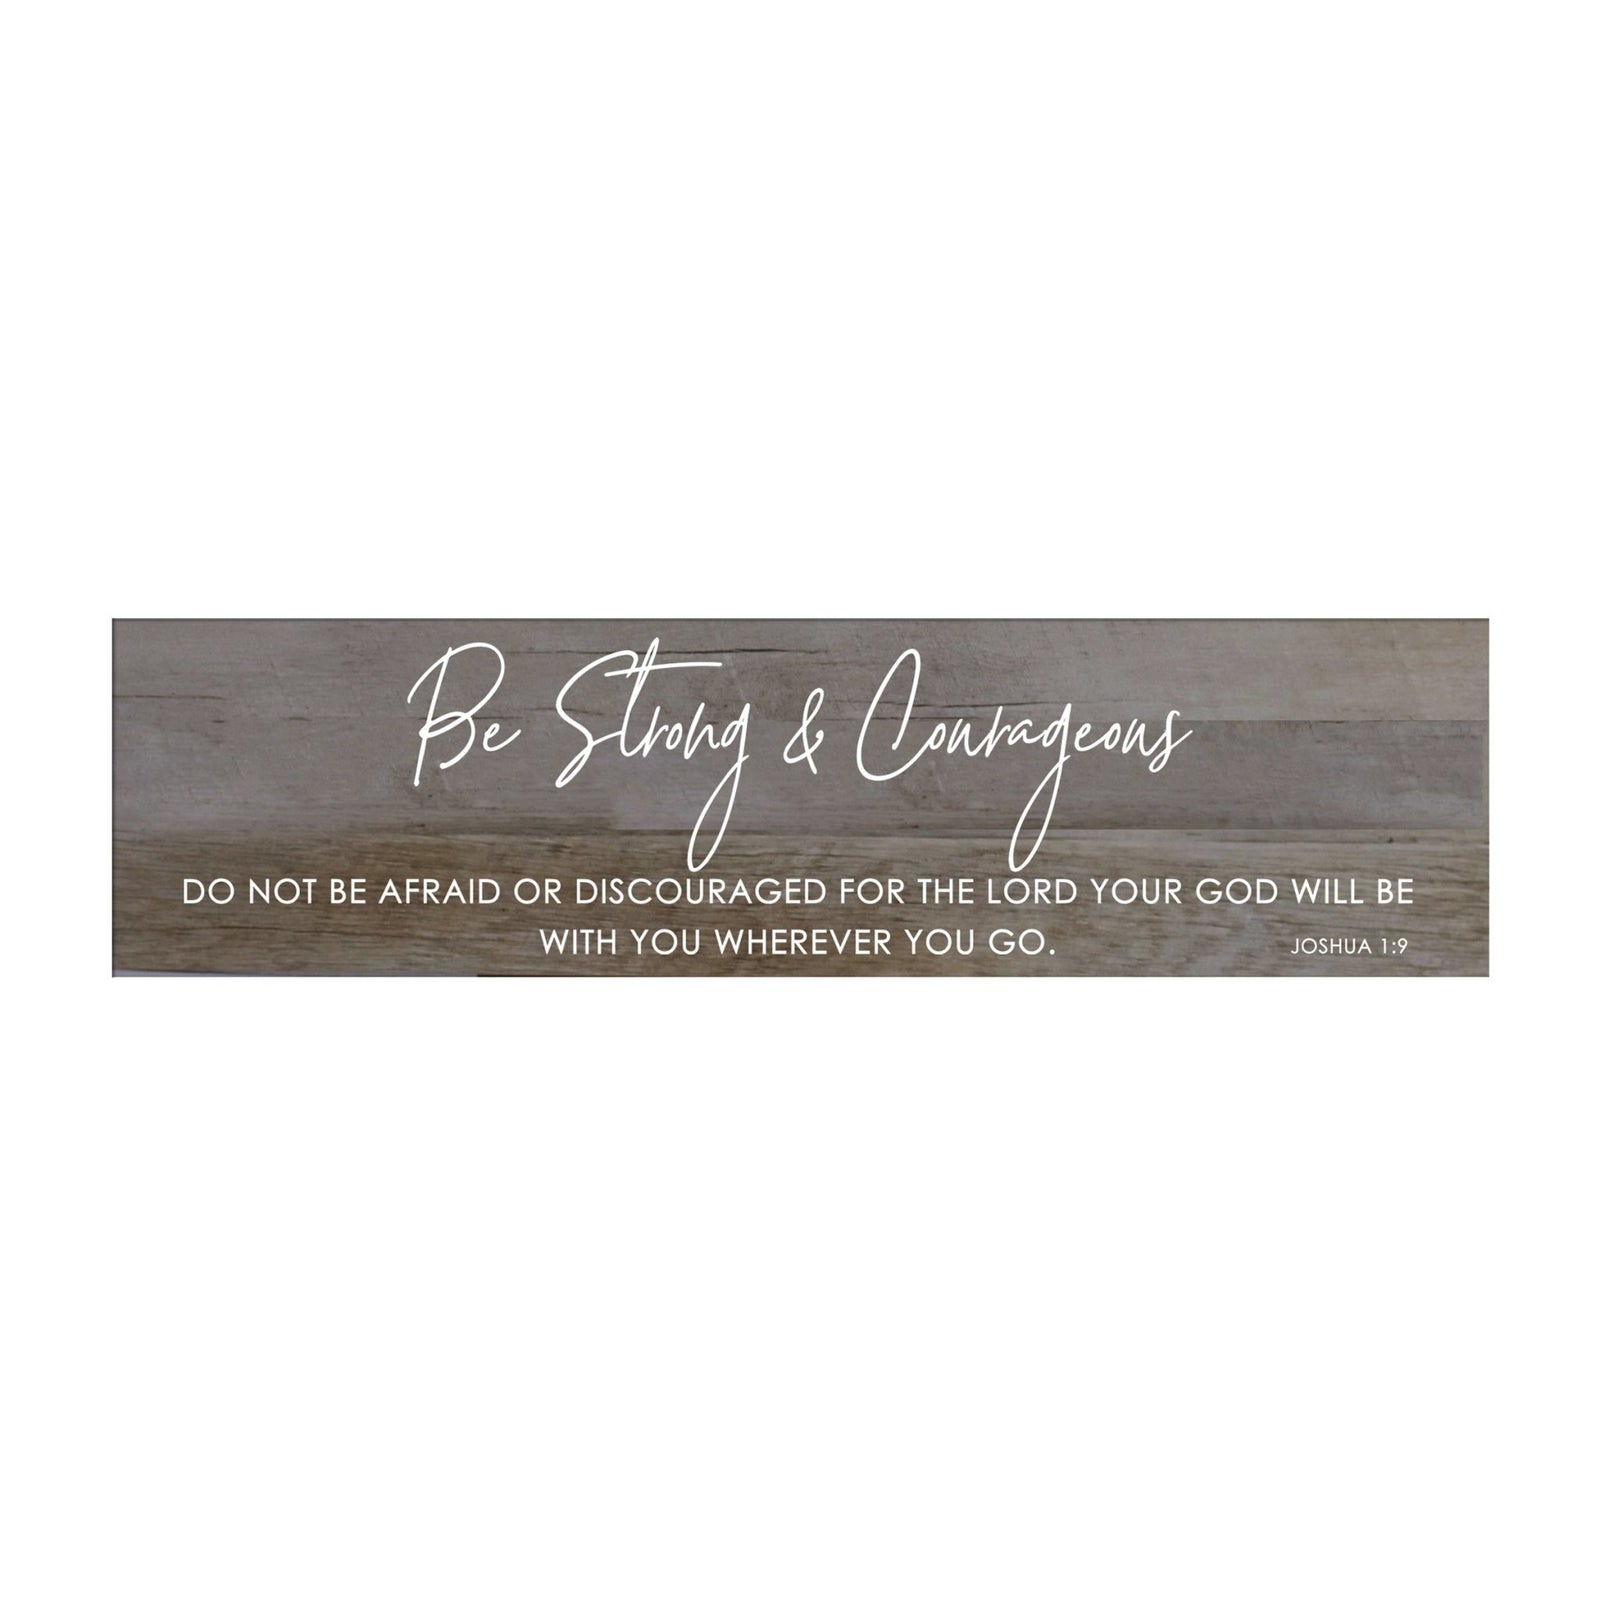 Inspirational Everyday Home and Family Wooden Wall Art Hanging Plaque 10 x 40 – Be Strong & Courageous - LifeSong Milestones